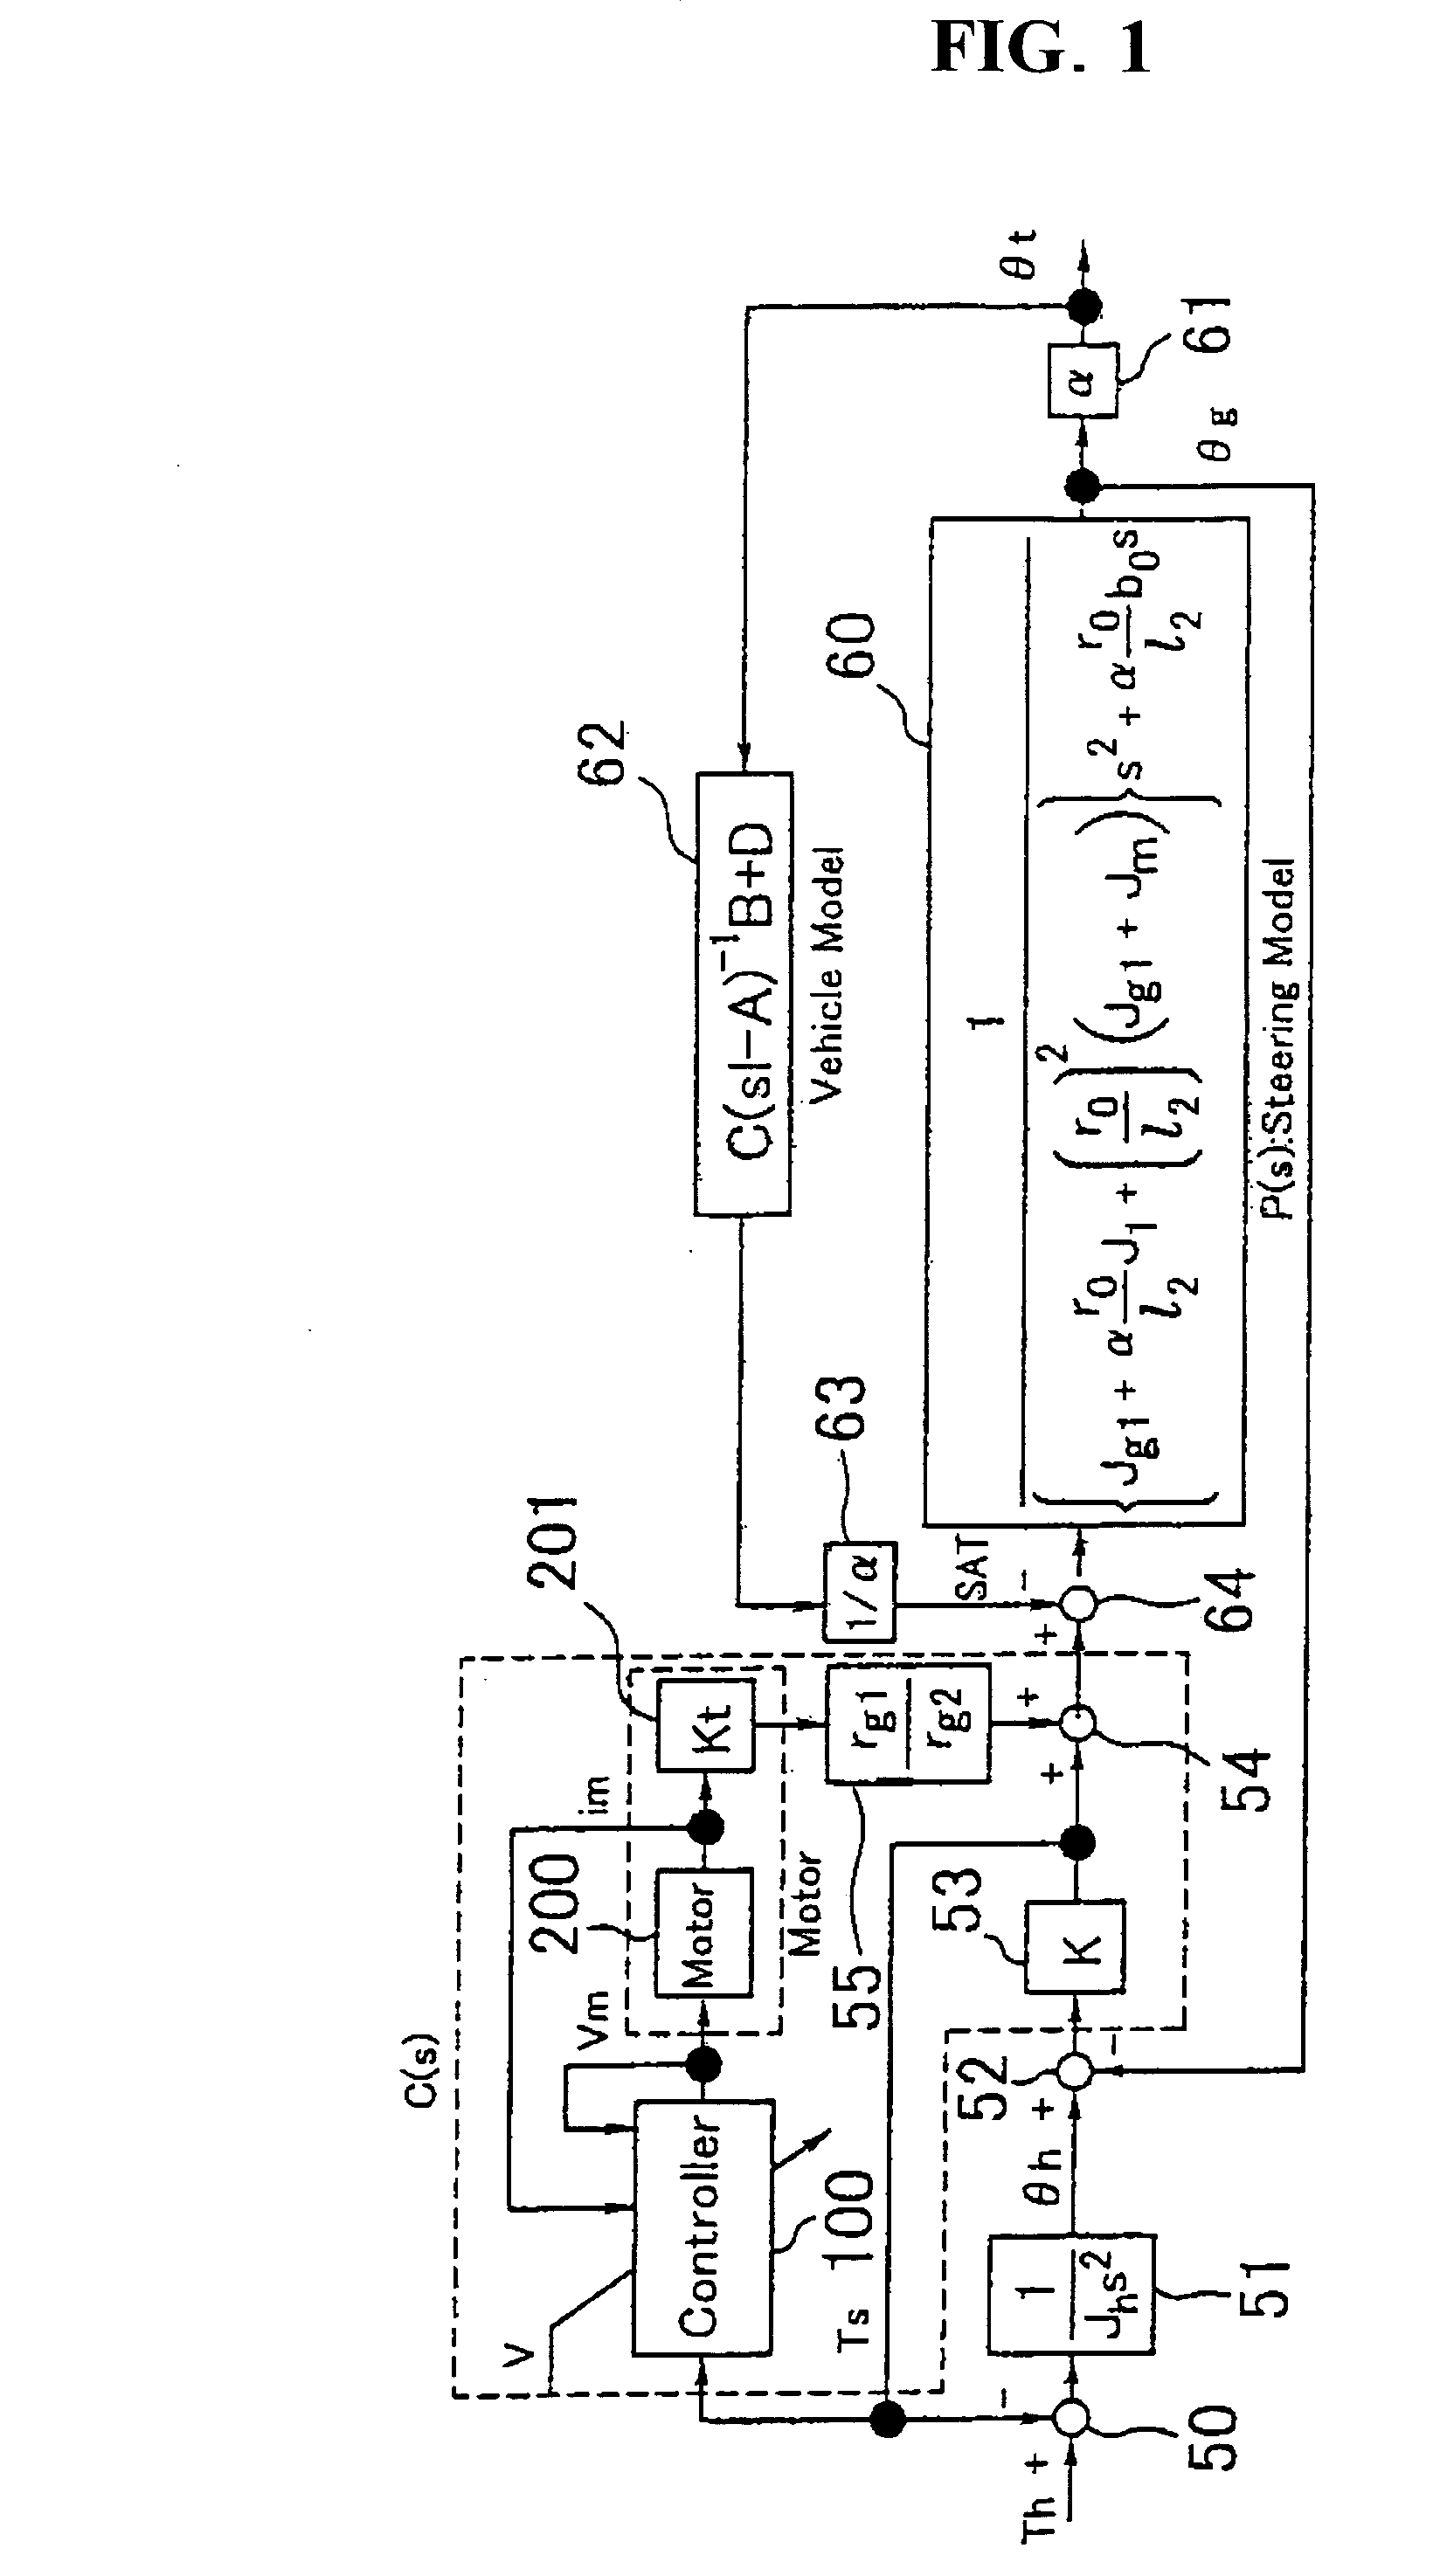 Control device for motorized power steering device